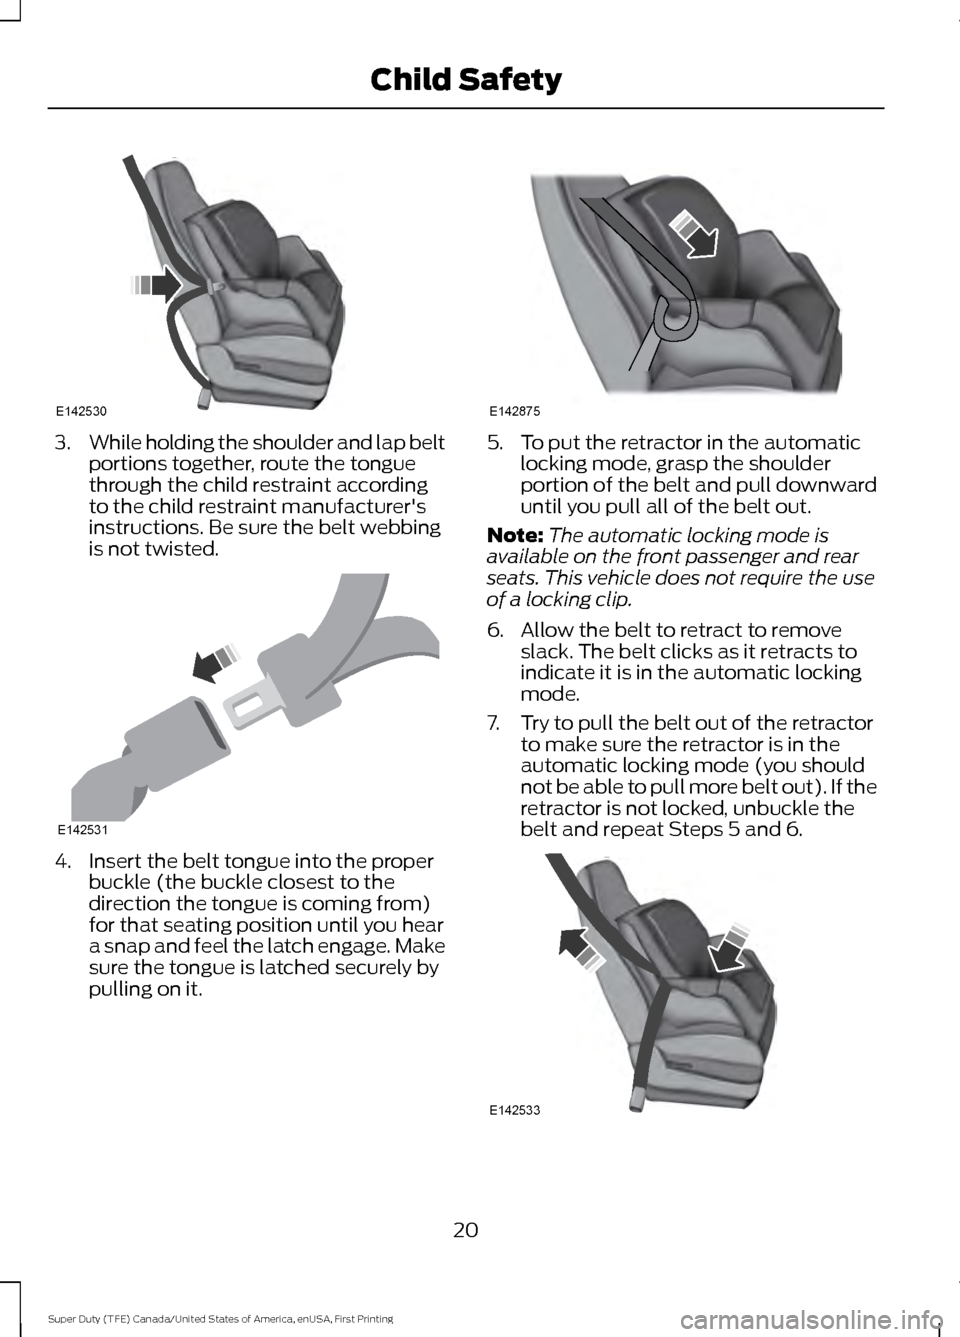 FORD SUPER DUTY 2017 4.G Owners Manual 3.
While holding the shoulder and lap belt
portions together, route the tongue
through the child restraint according
to the child restraint manufacturers
instructions. Be sure the belt webbing
is not